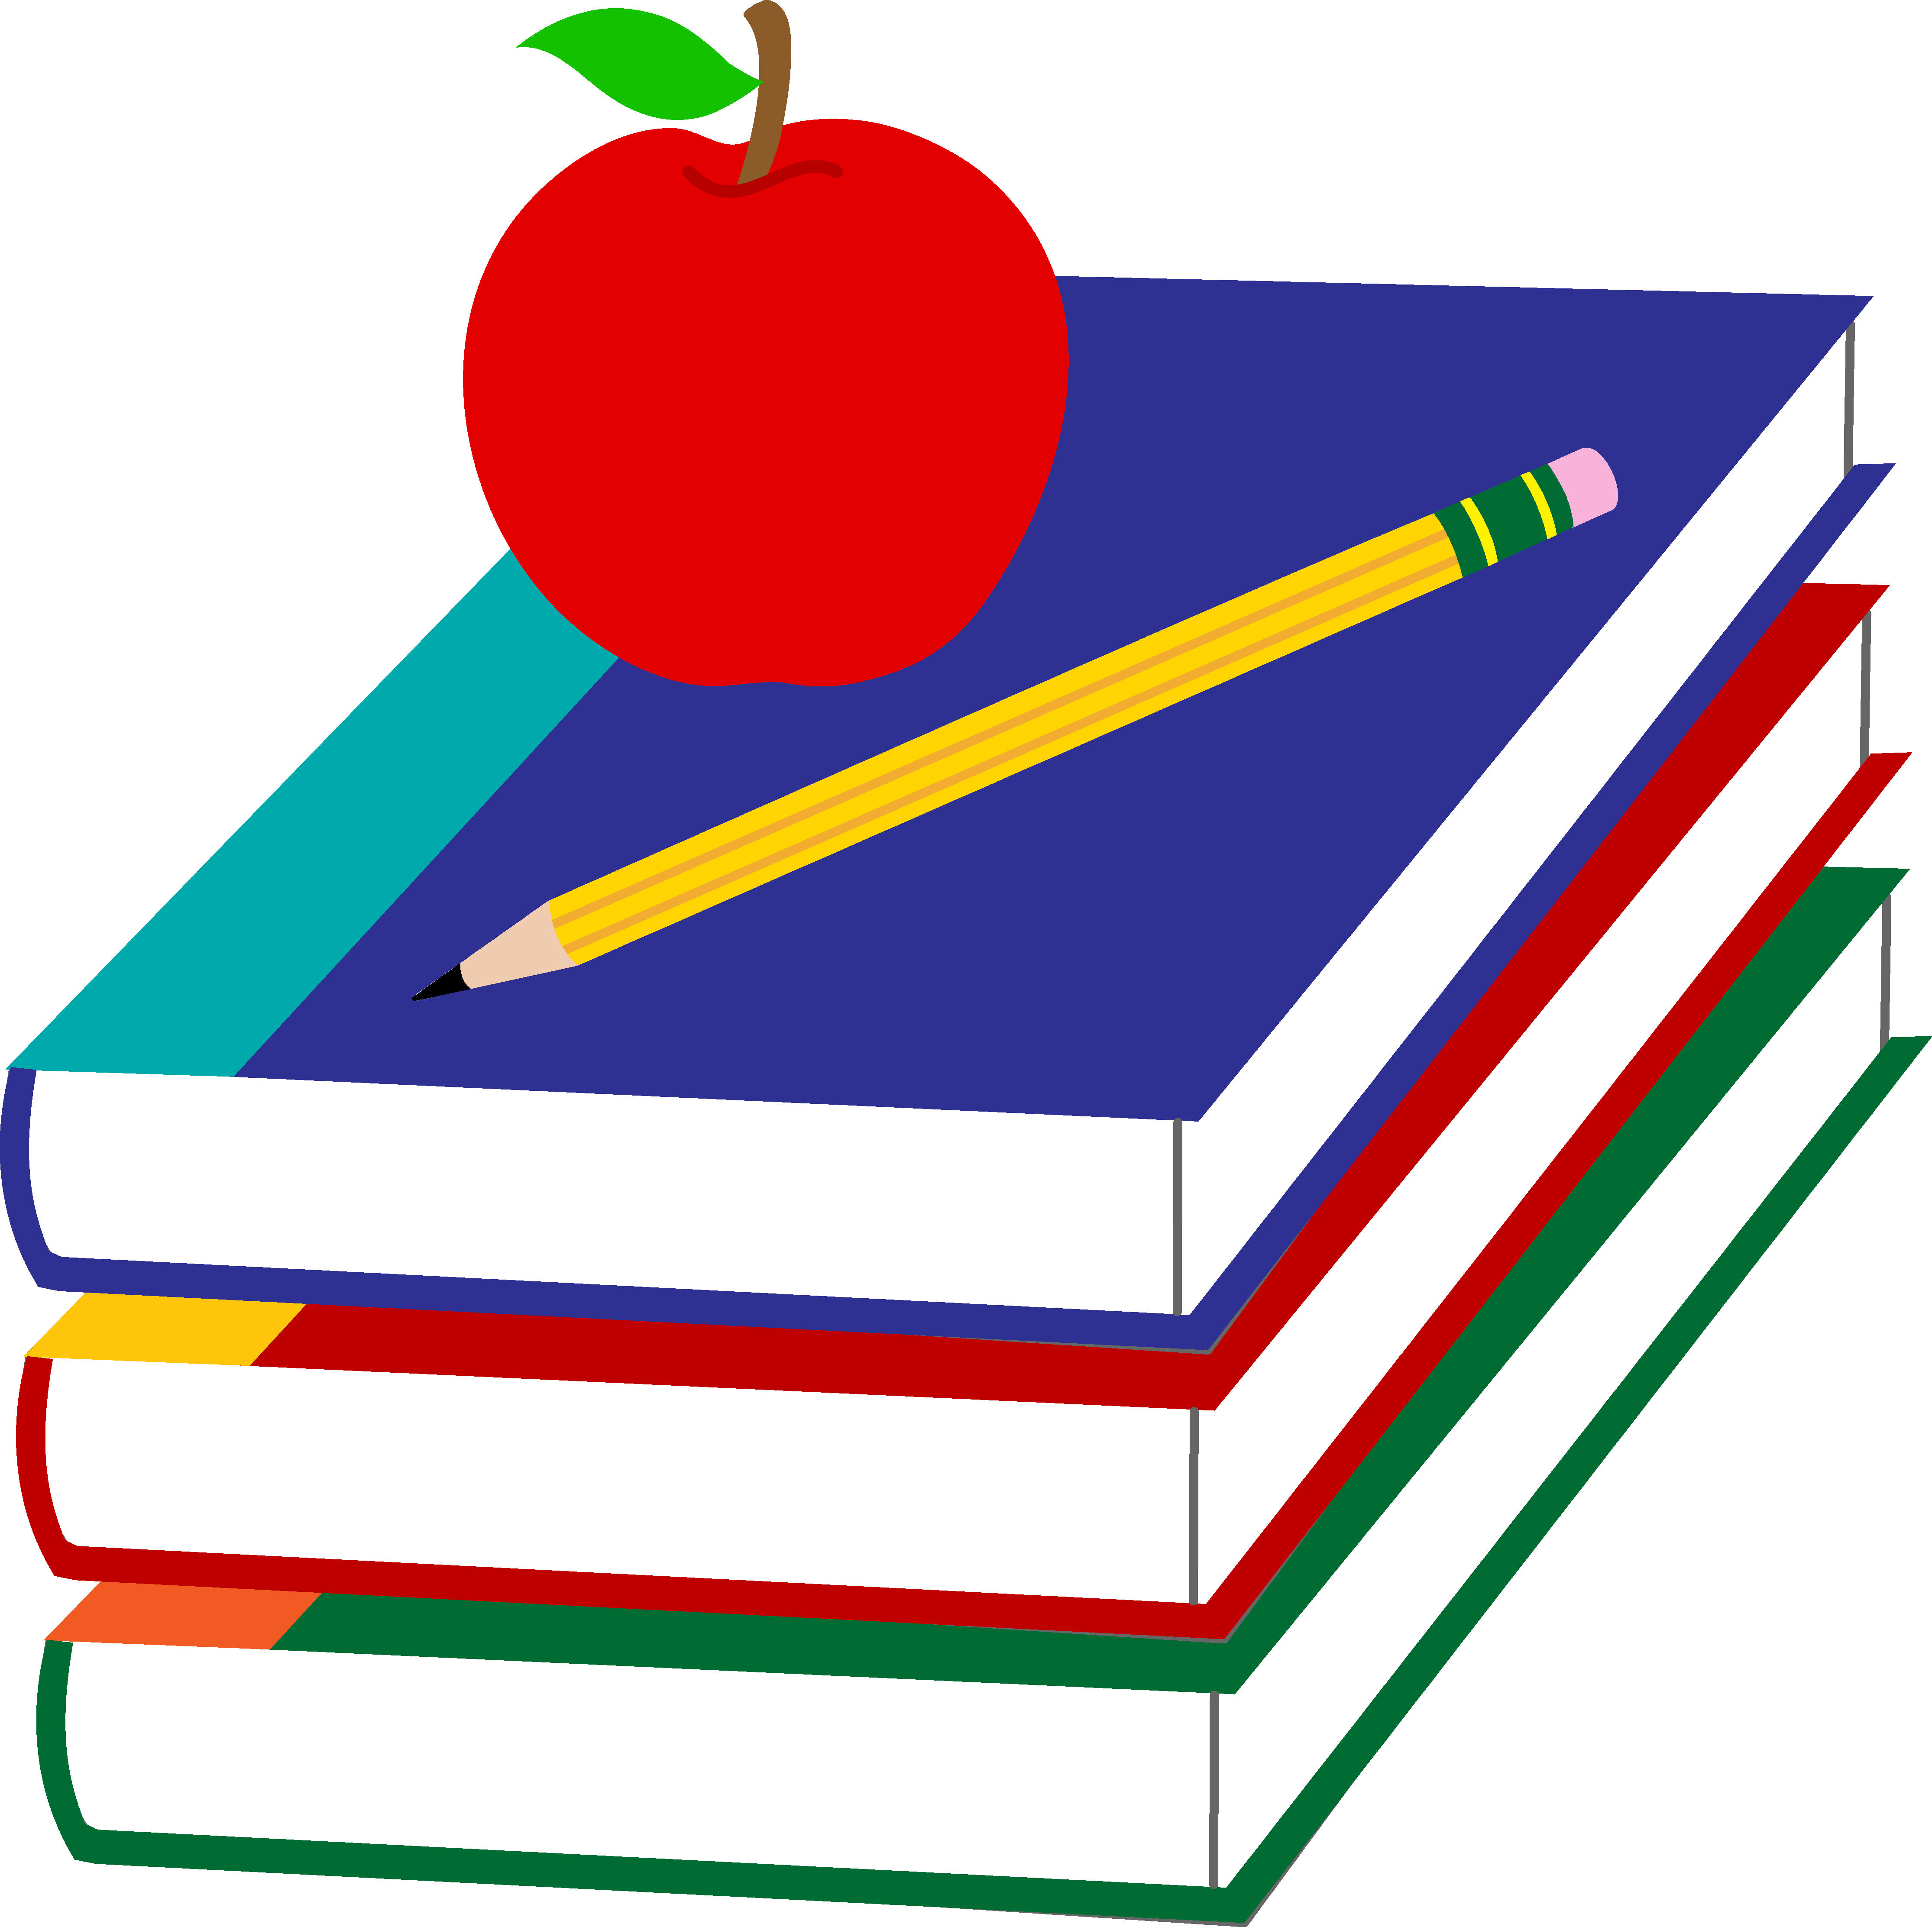 Image of school supplies clipart 2 clip art free